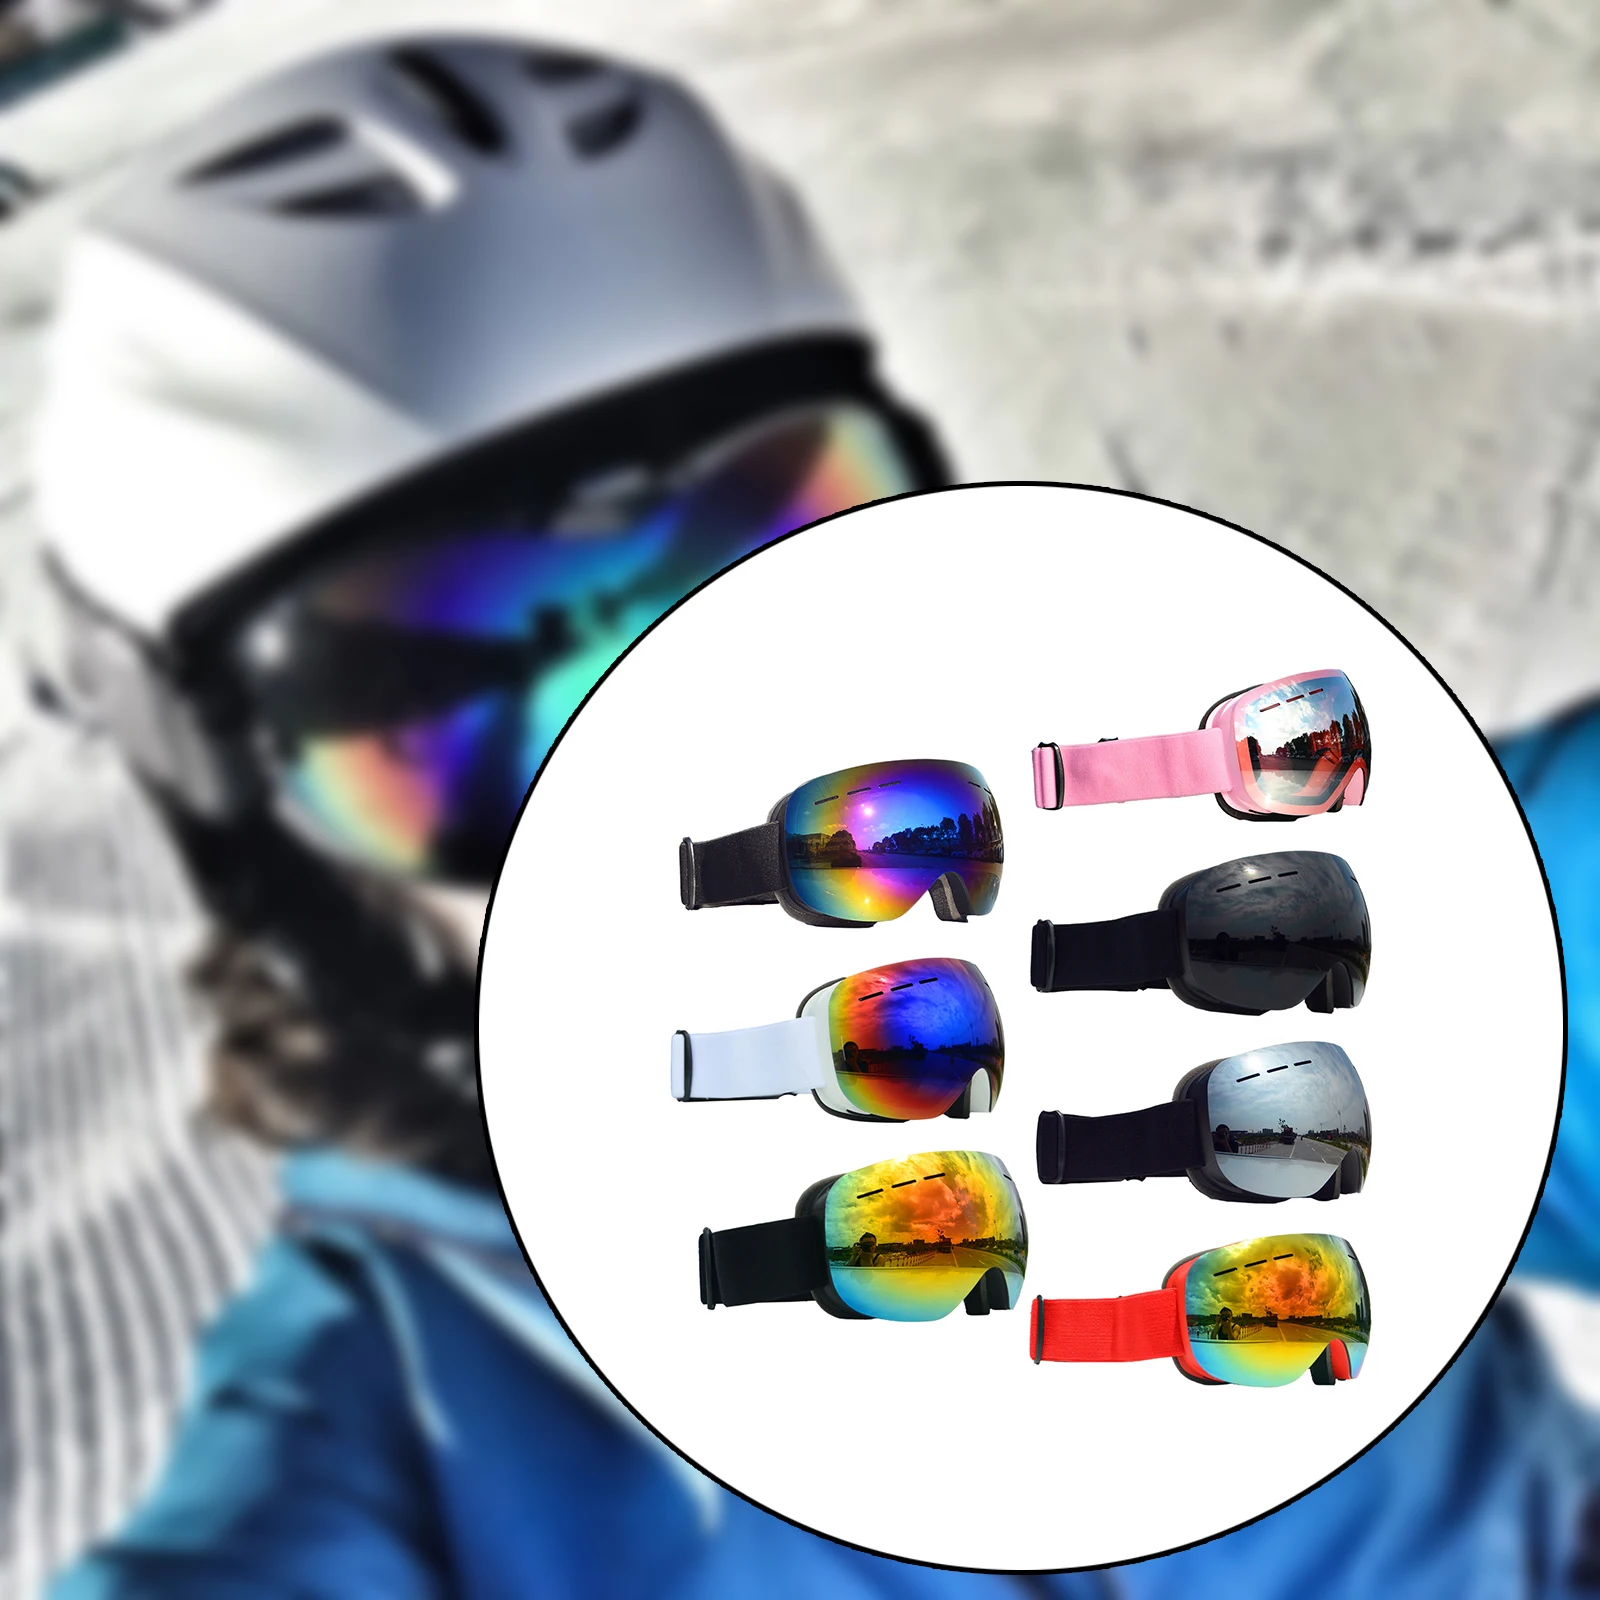 Magnetic Ski Goggles Snow Anti Fog Lenses Windproof Dustproof Glasses for Motorcycle Winter Snowmobile Boys Youth